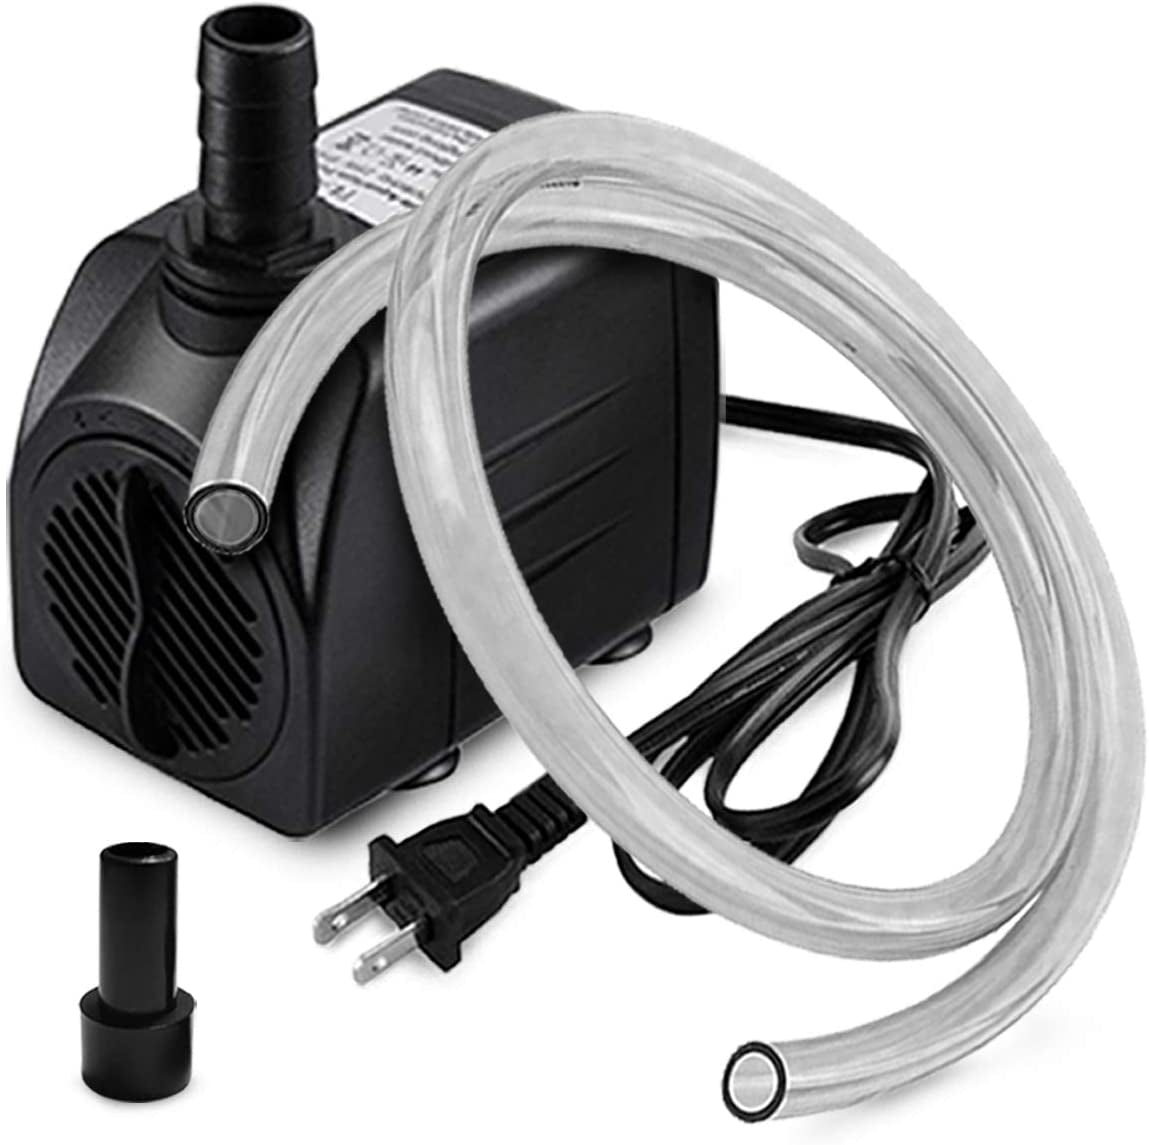 10W 160GPH Submersible Pump with 3.3 Ft Tubing for Aquariums, Fish Tank, Pond Fountain, Statuary, Hydroponics, Water Feature, Indoor Fountains